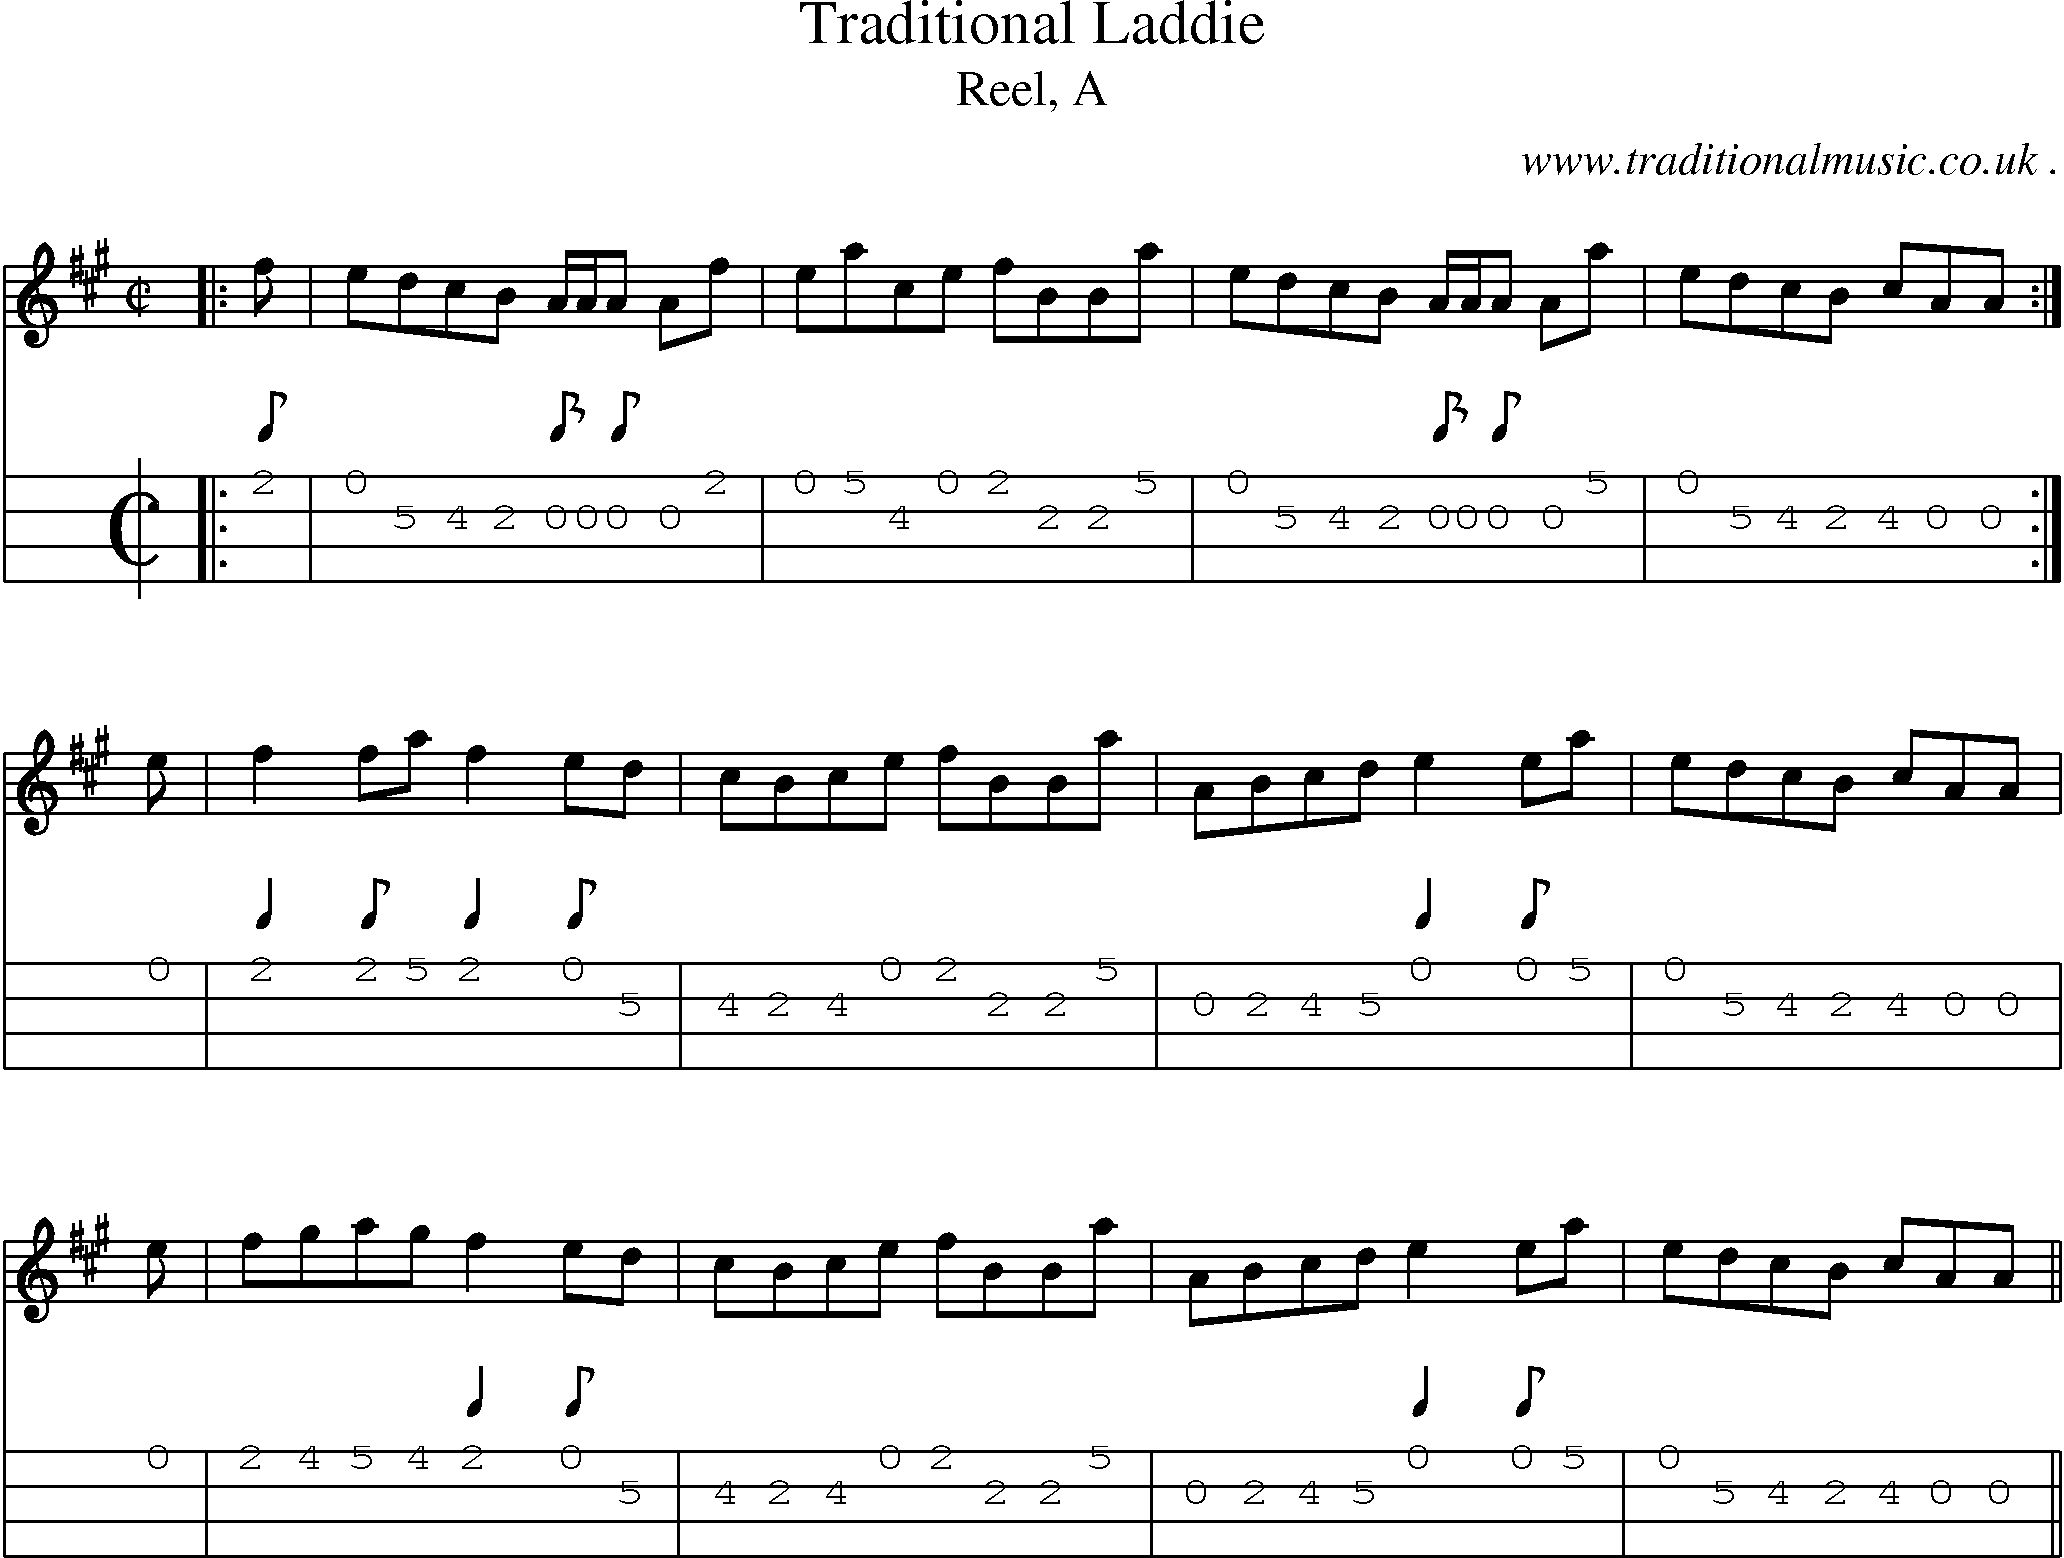 Sheet-music  score, Chords and Mandolin Tabs for Traditional Laddie